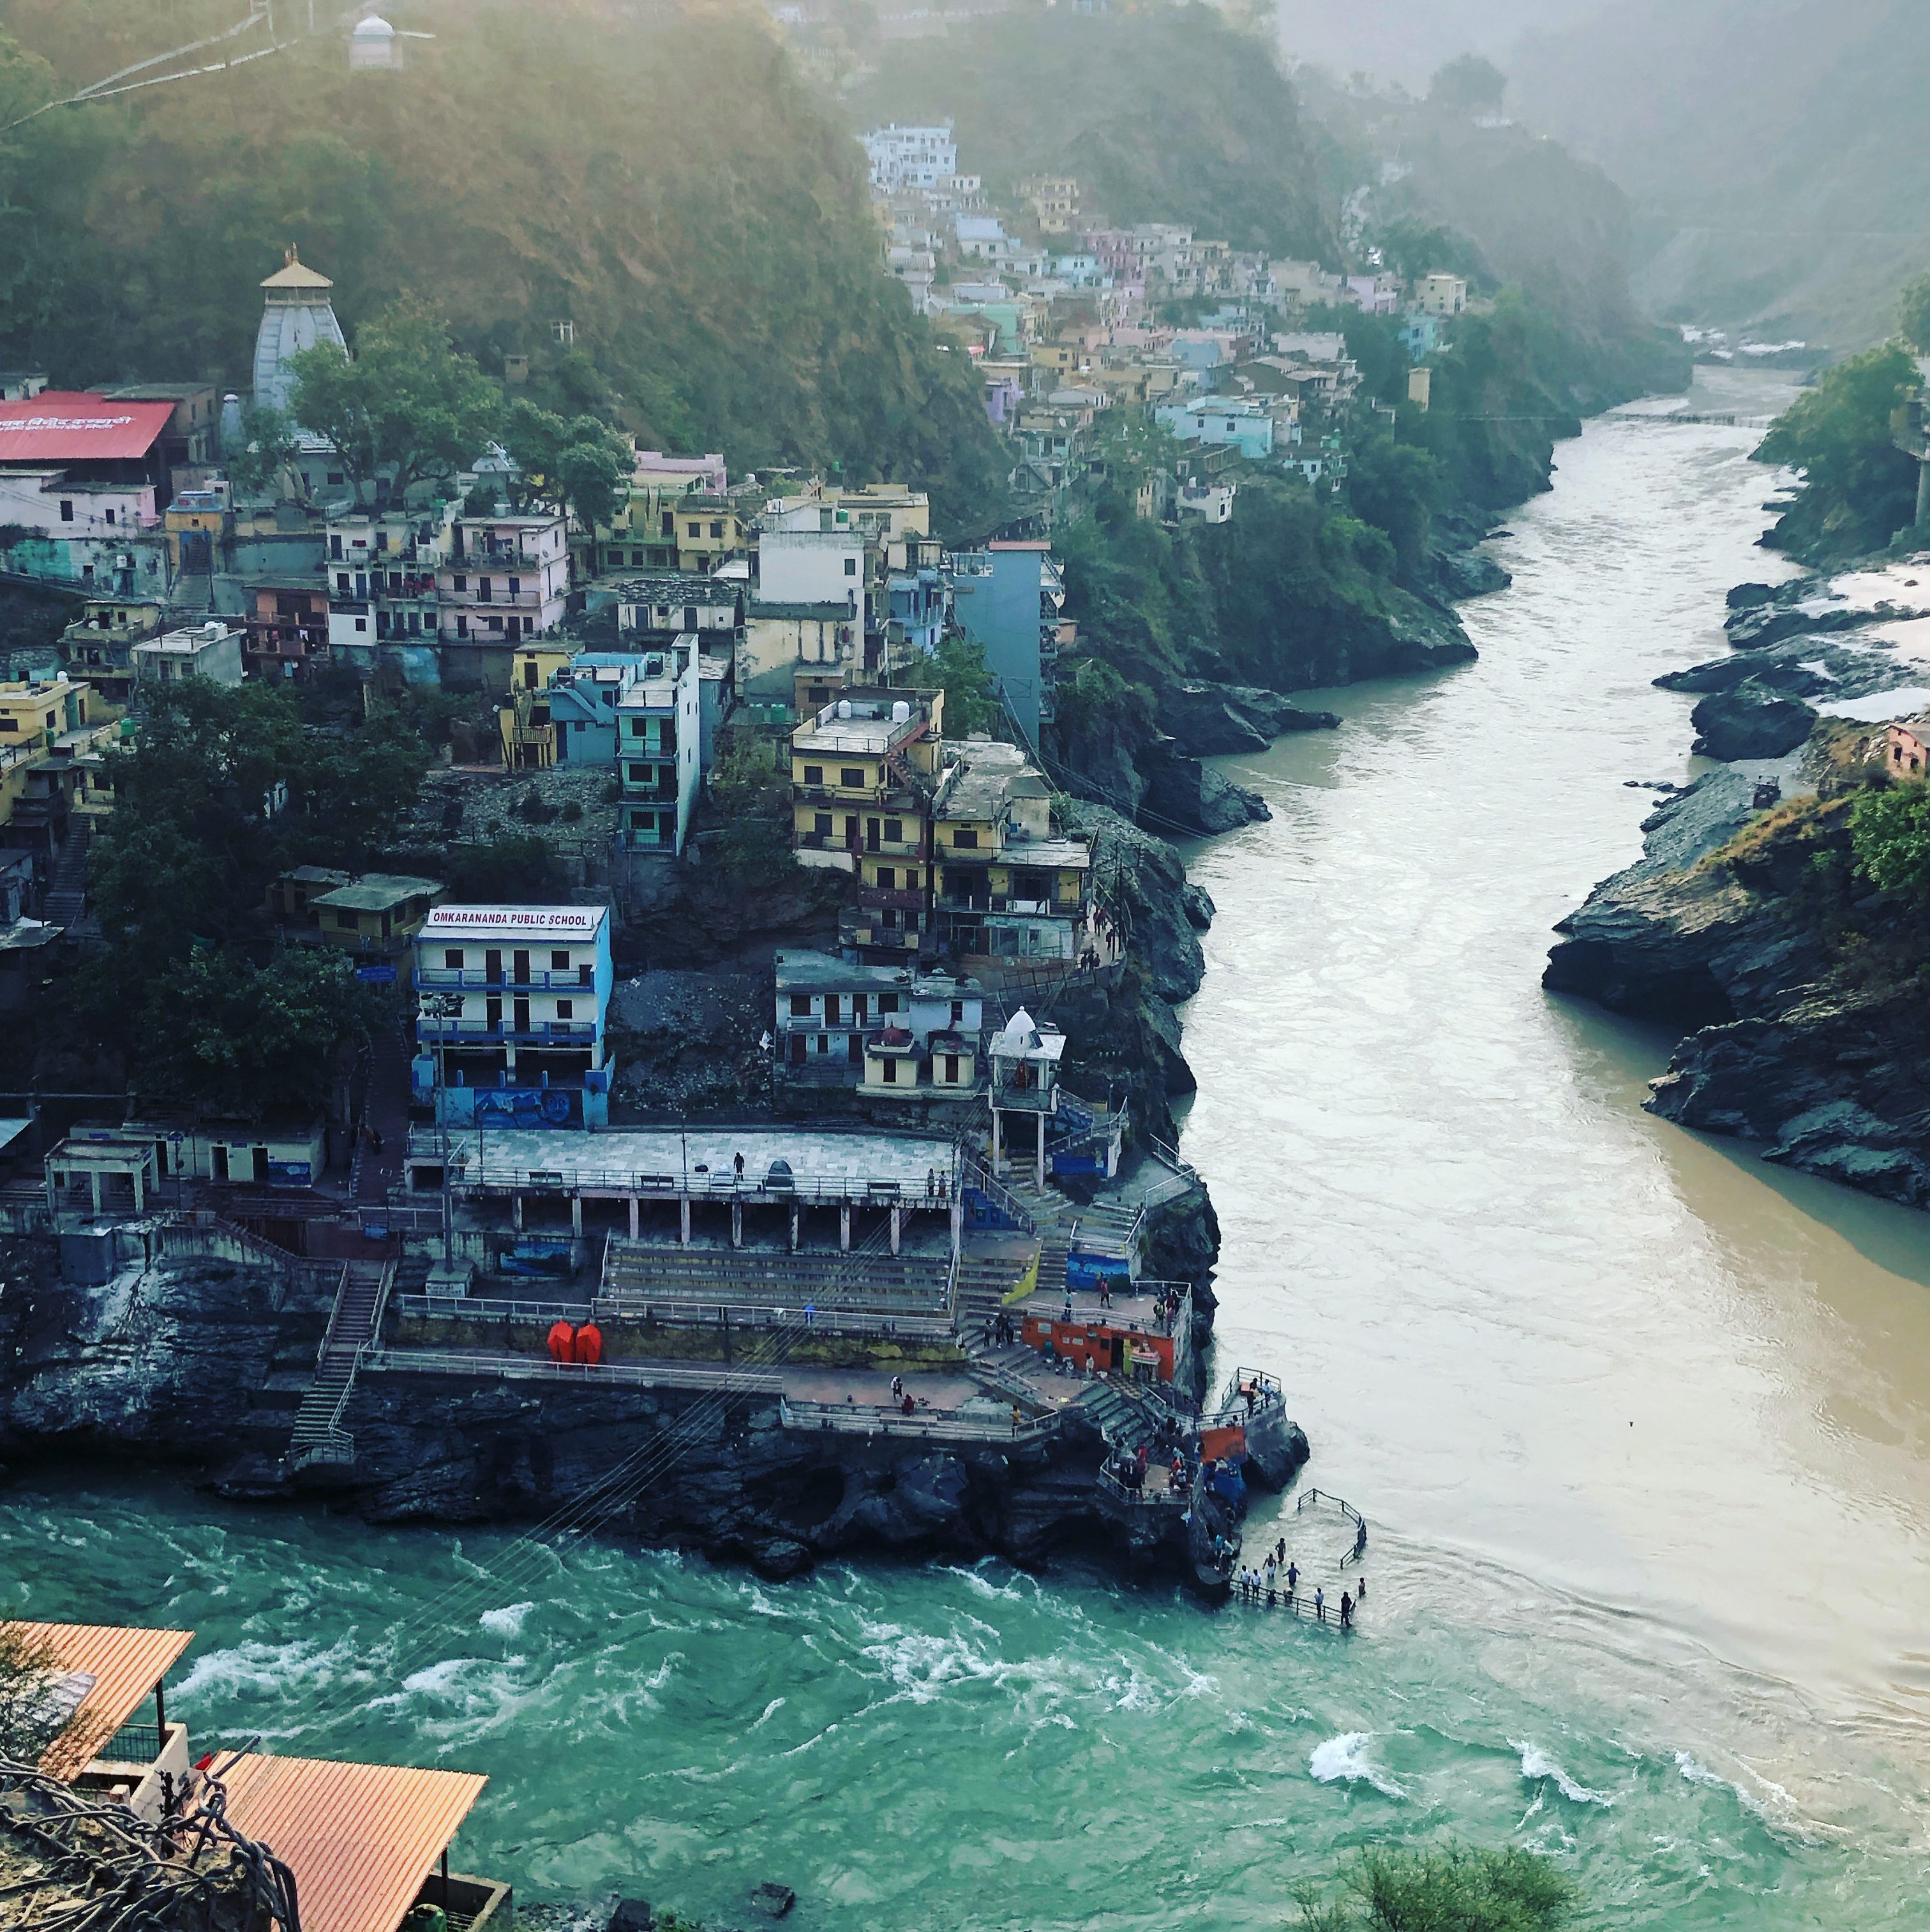 Devprayag - the confluence point of the Bhagirathi and Alaknanda Rivers. 